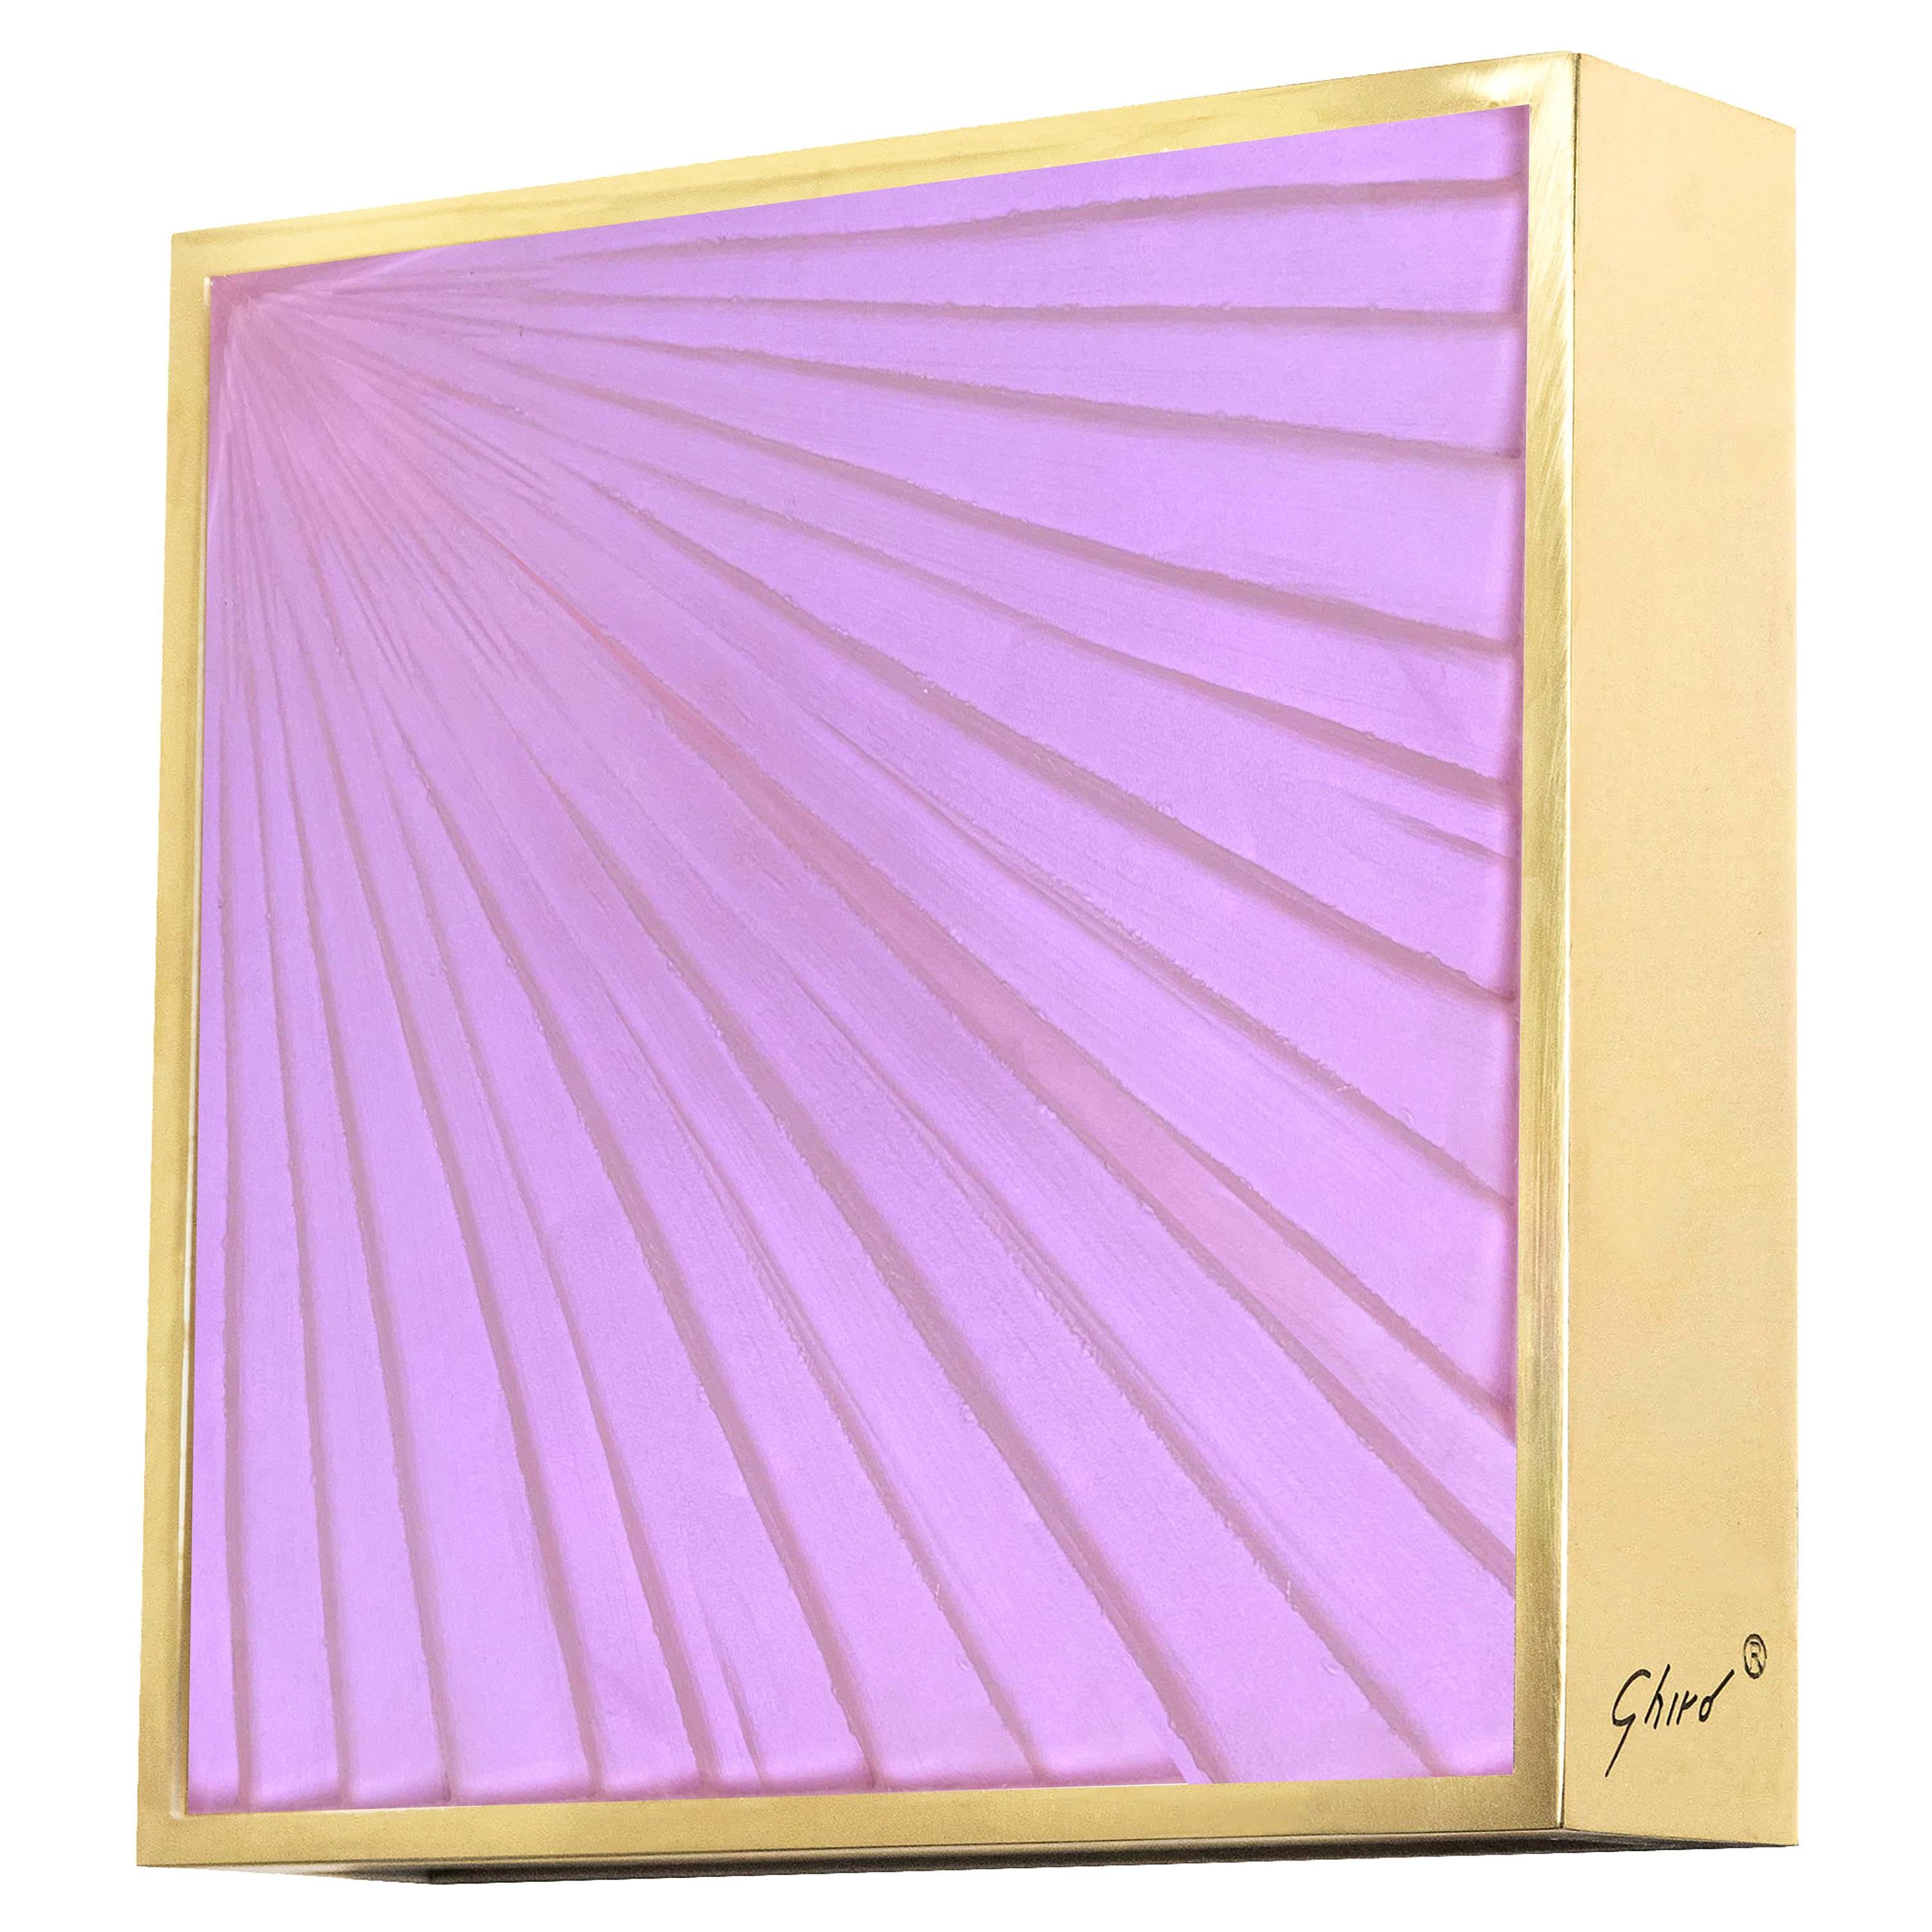 Contemporary 'Square' Sconce Pink Crystal, Brass and 24 Kt Gold by Ghirò Studio For Sale